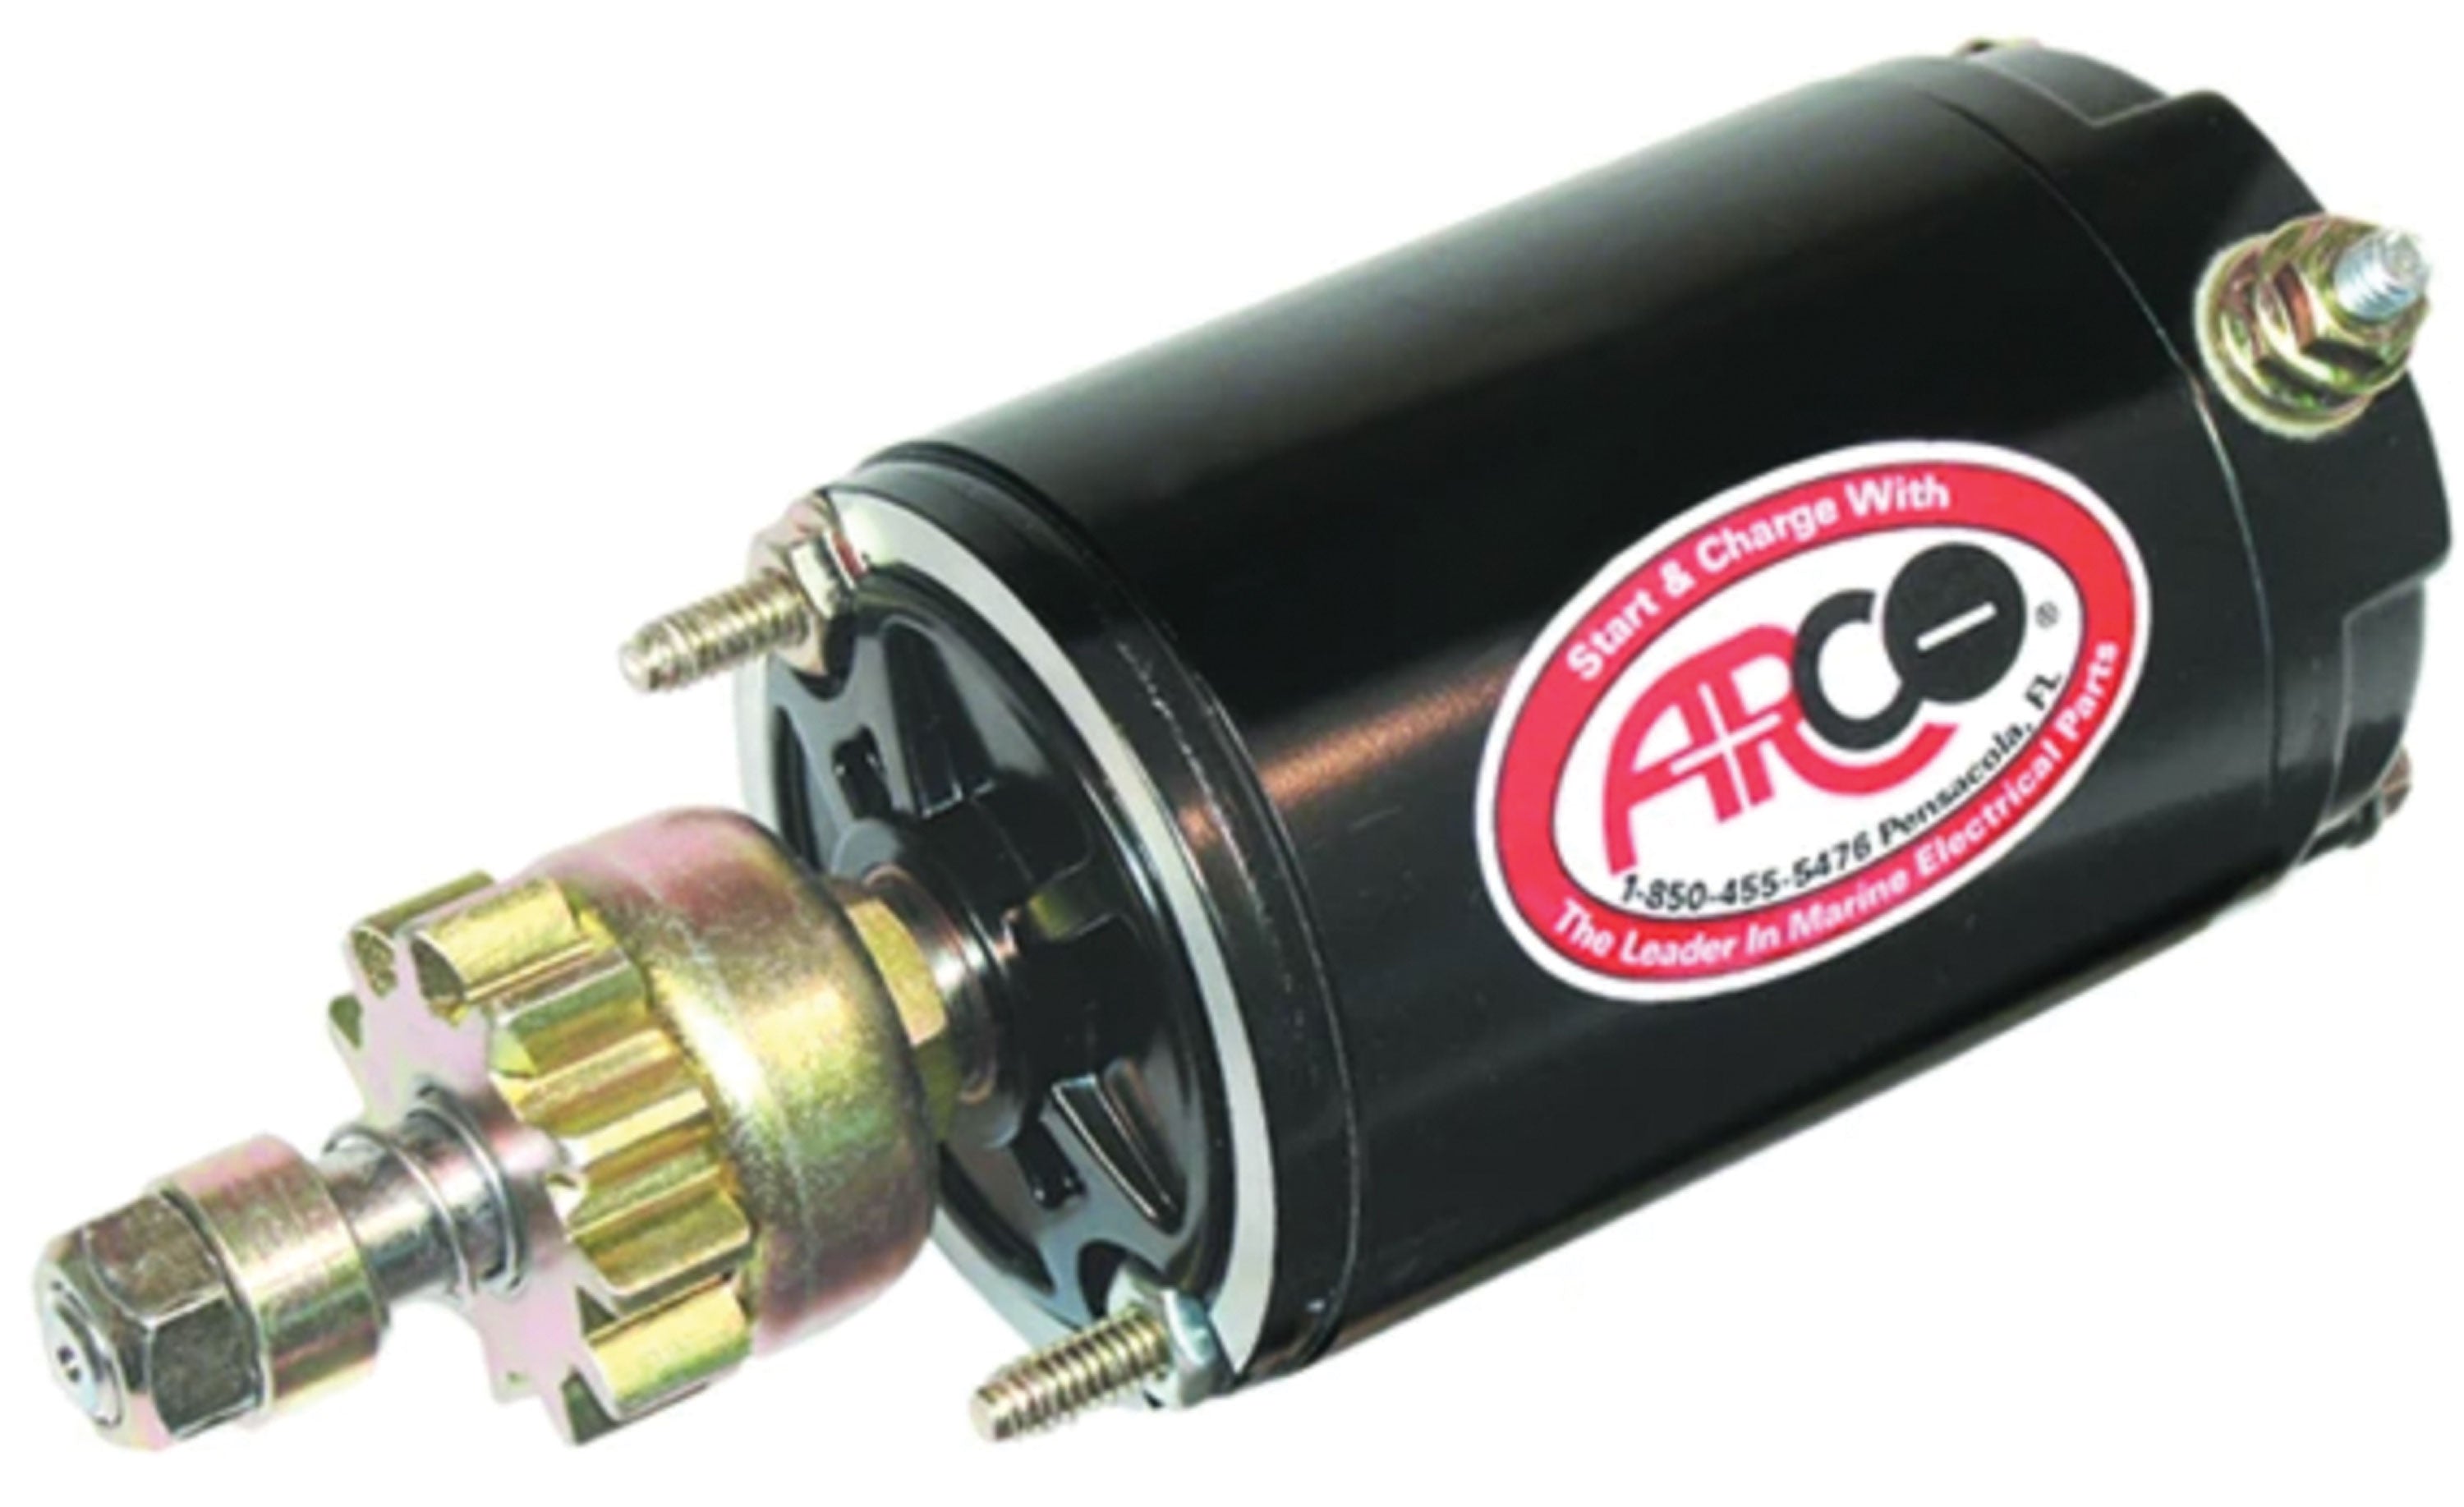 ARCO 5376 Outboard Starter for BRP-OMC 18-40 HP, 11-Tooth Gear Drive